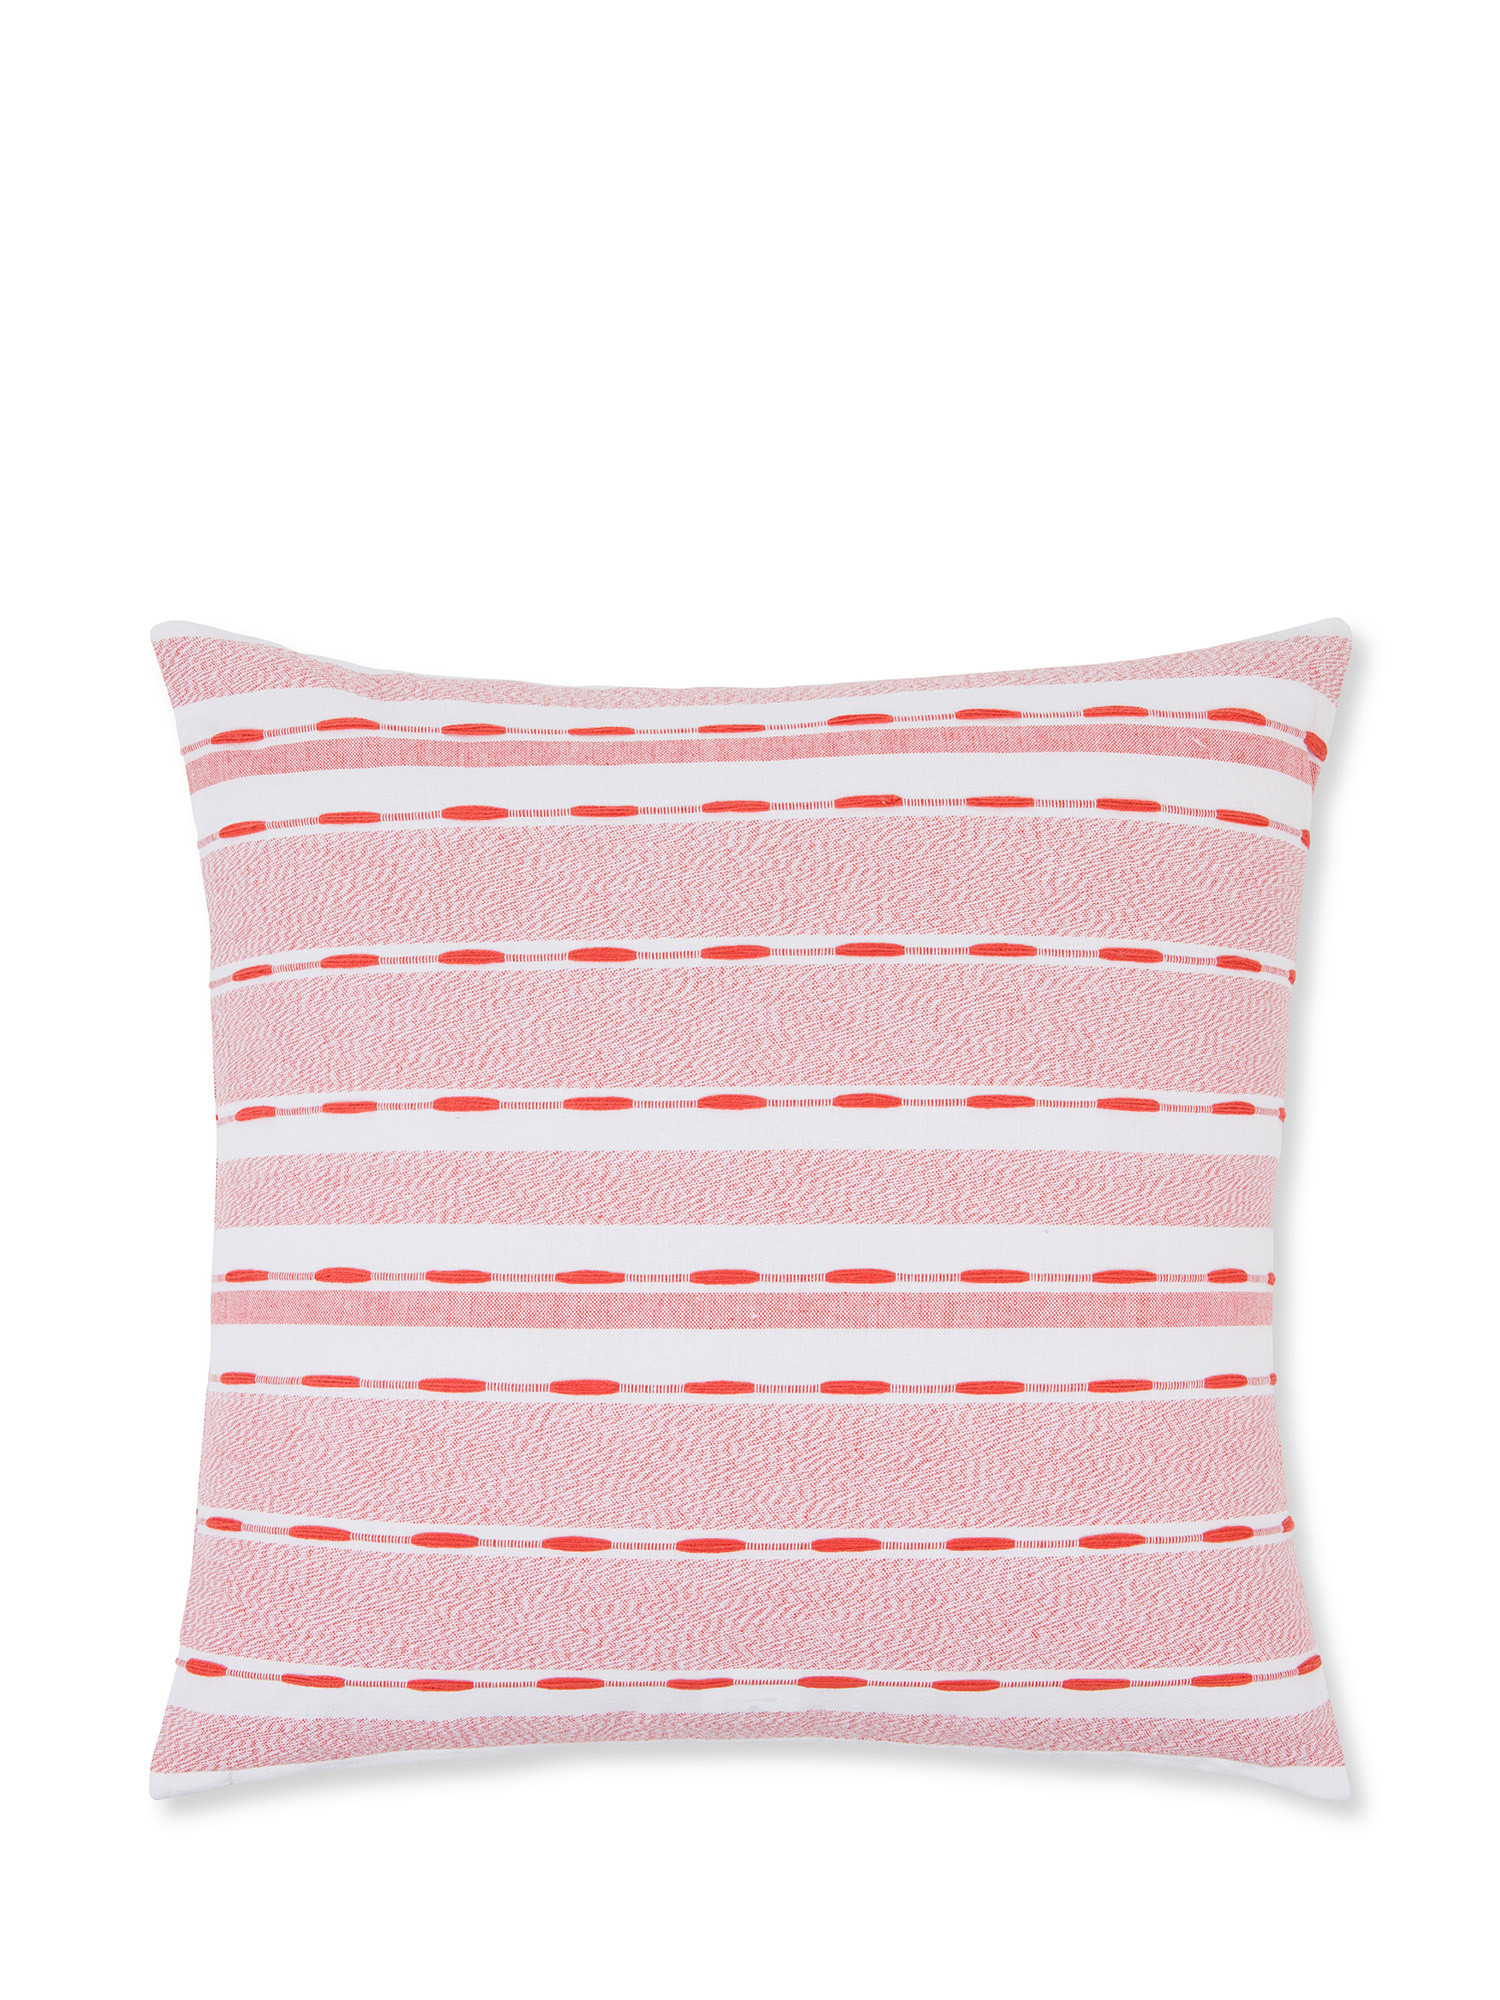 Cushion with raised stitching motif 45x45cm, Light Pink, large image number 1